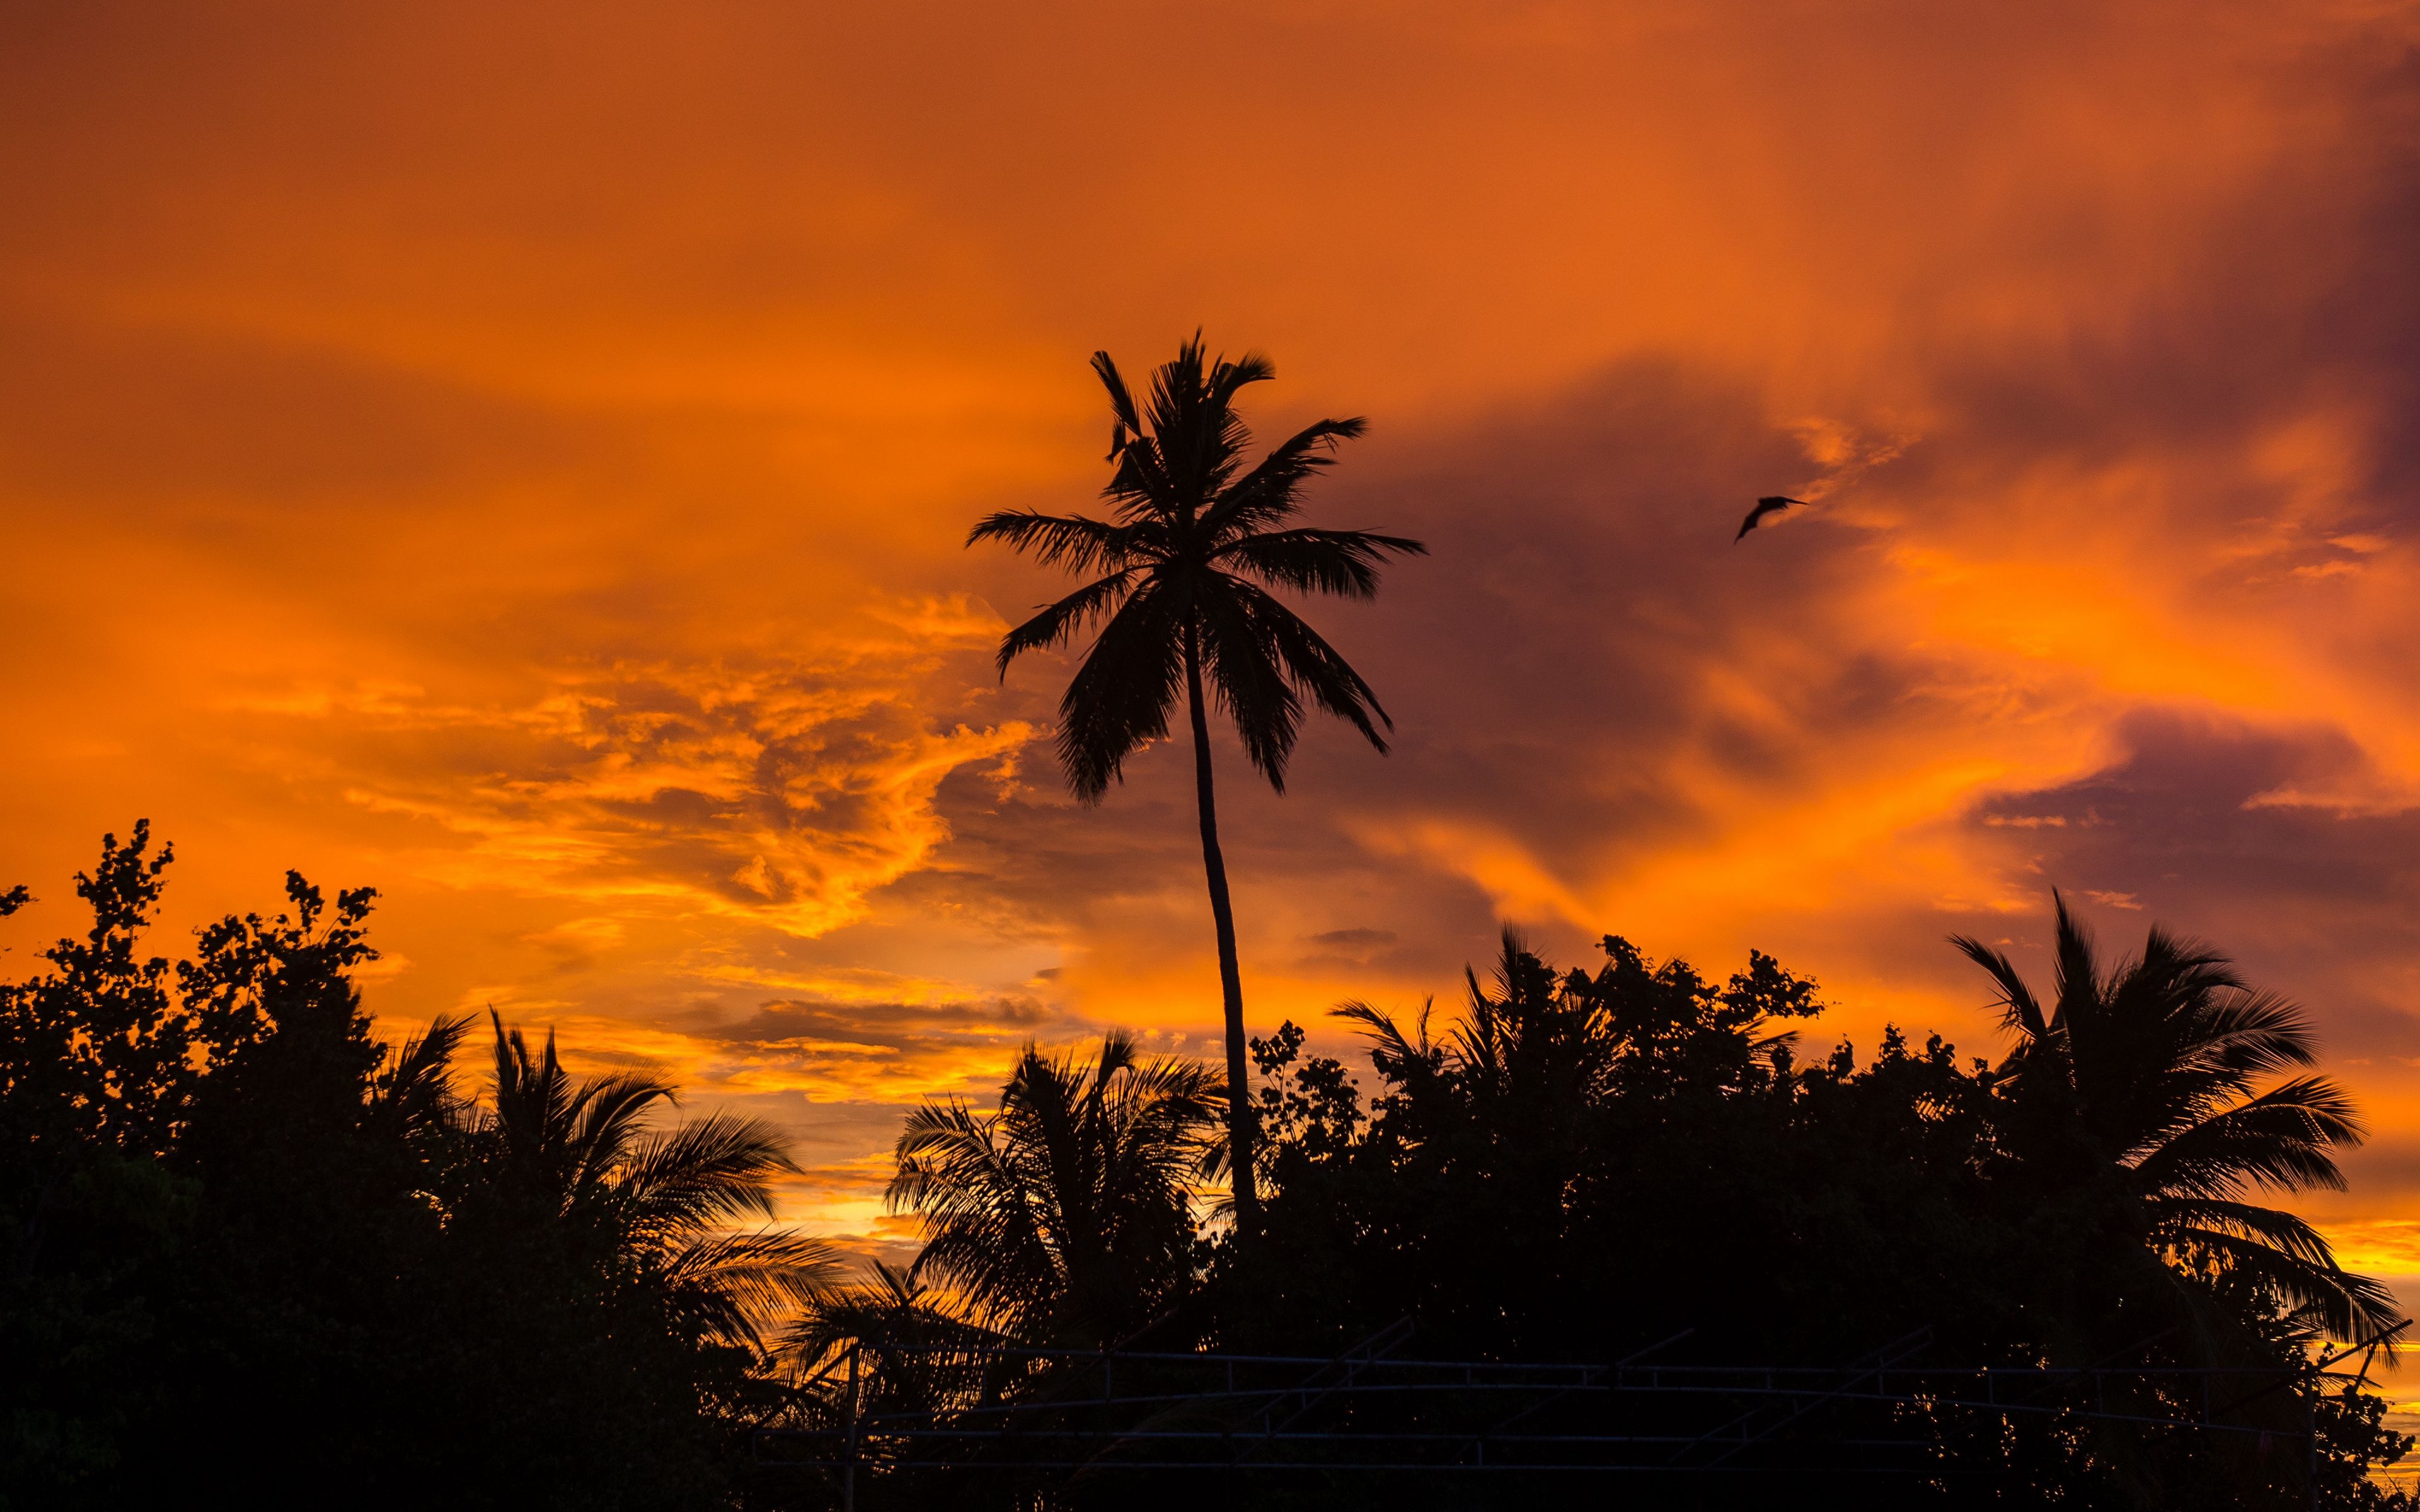 Download Wallpaper 3840x2400 Palm Trees Sunset Tropics Sky Clouds